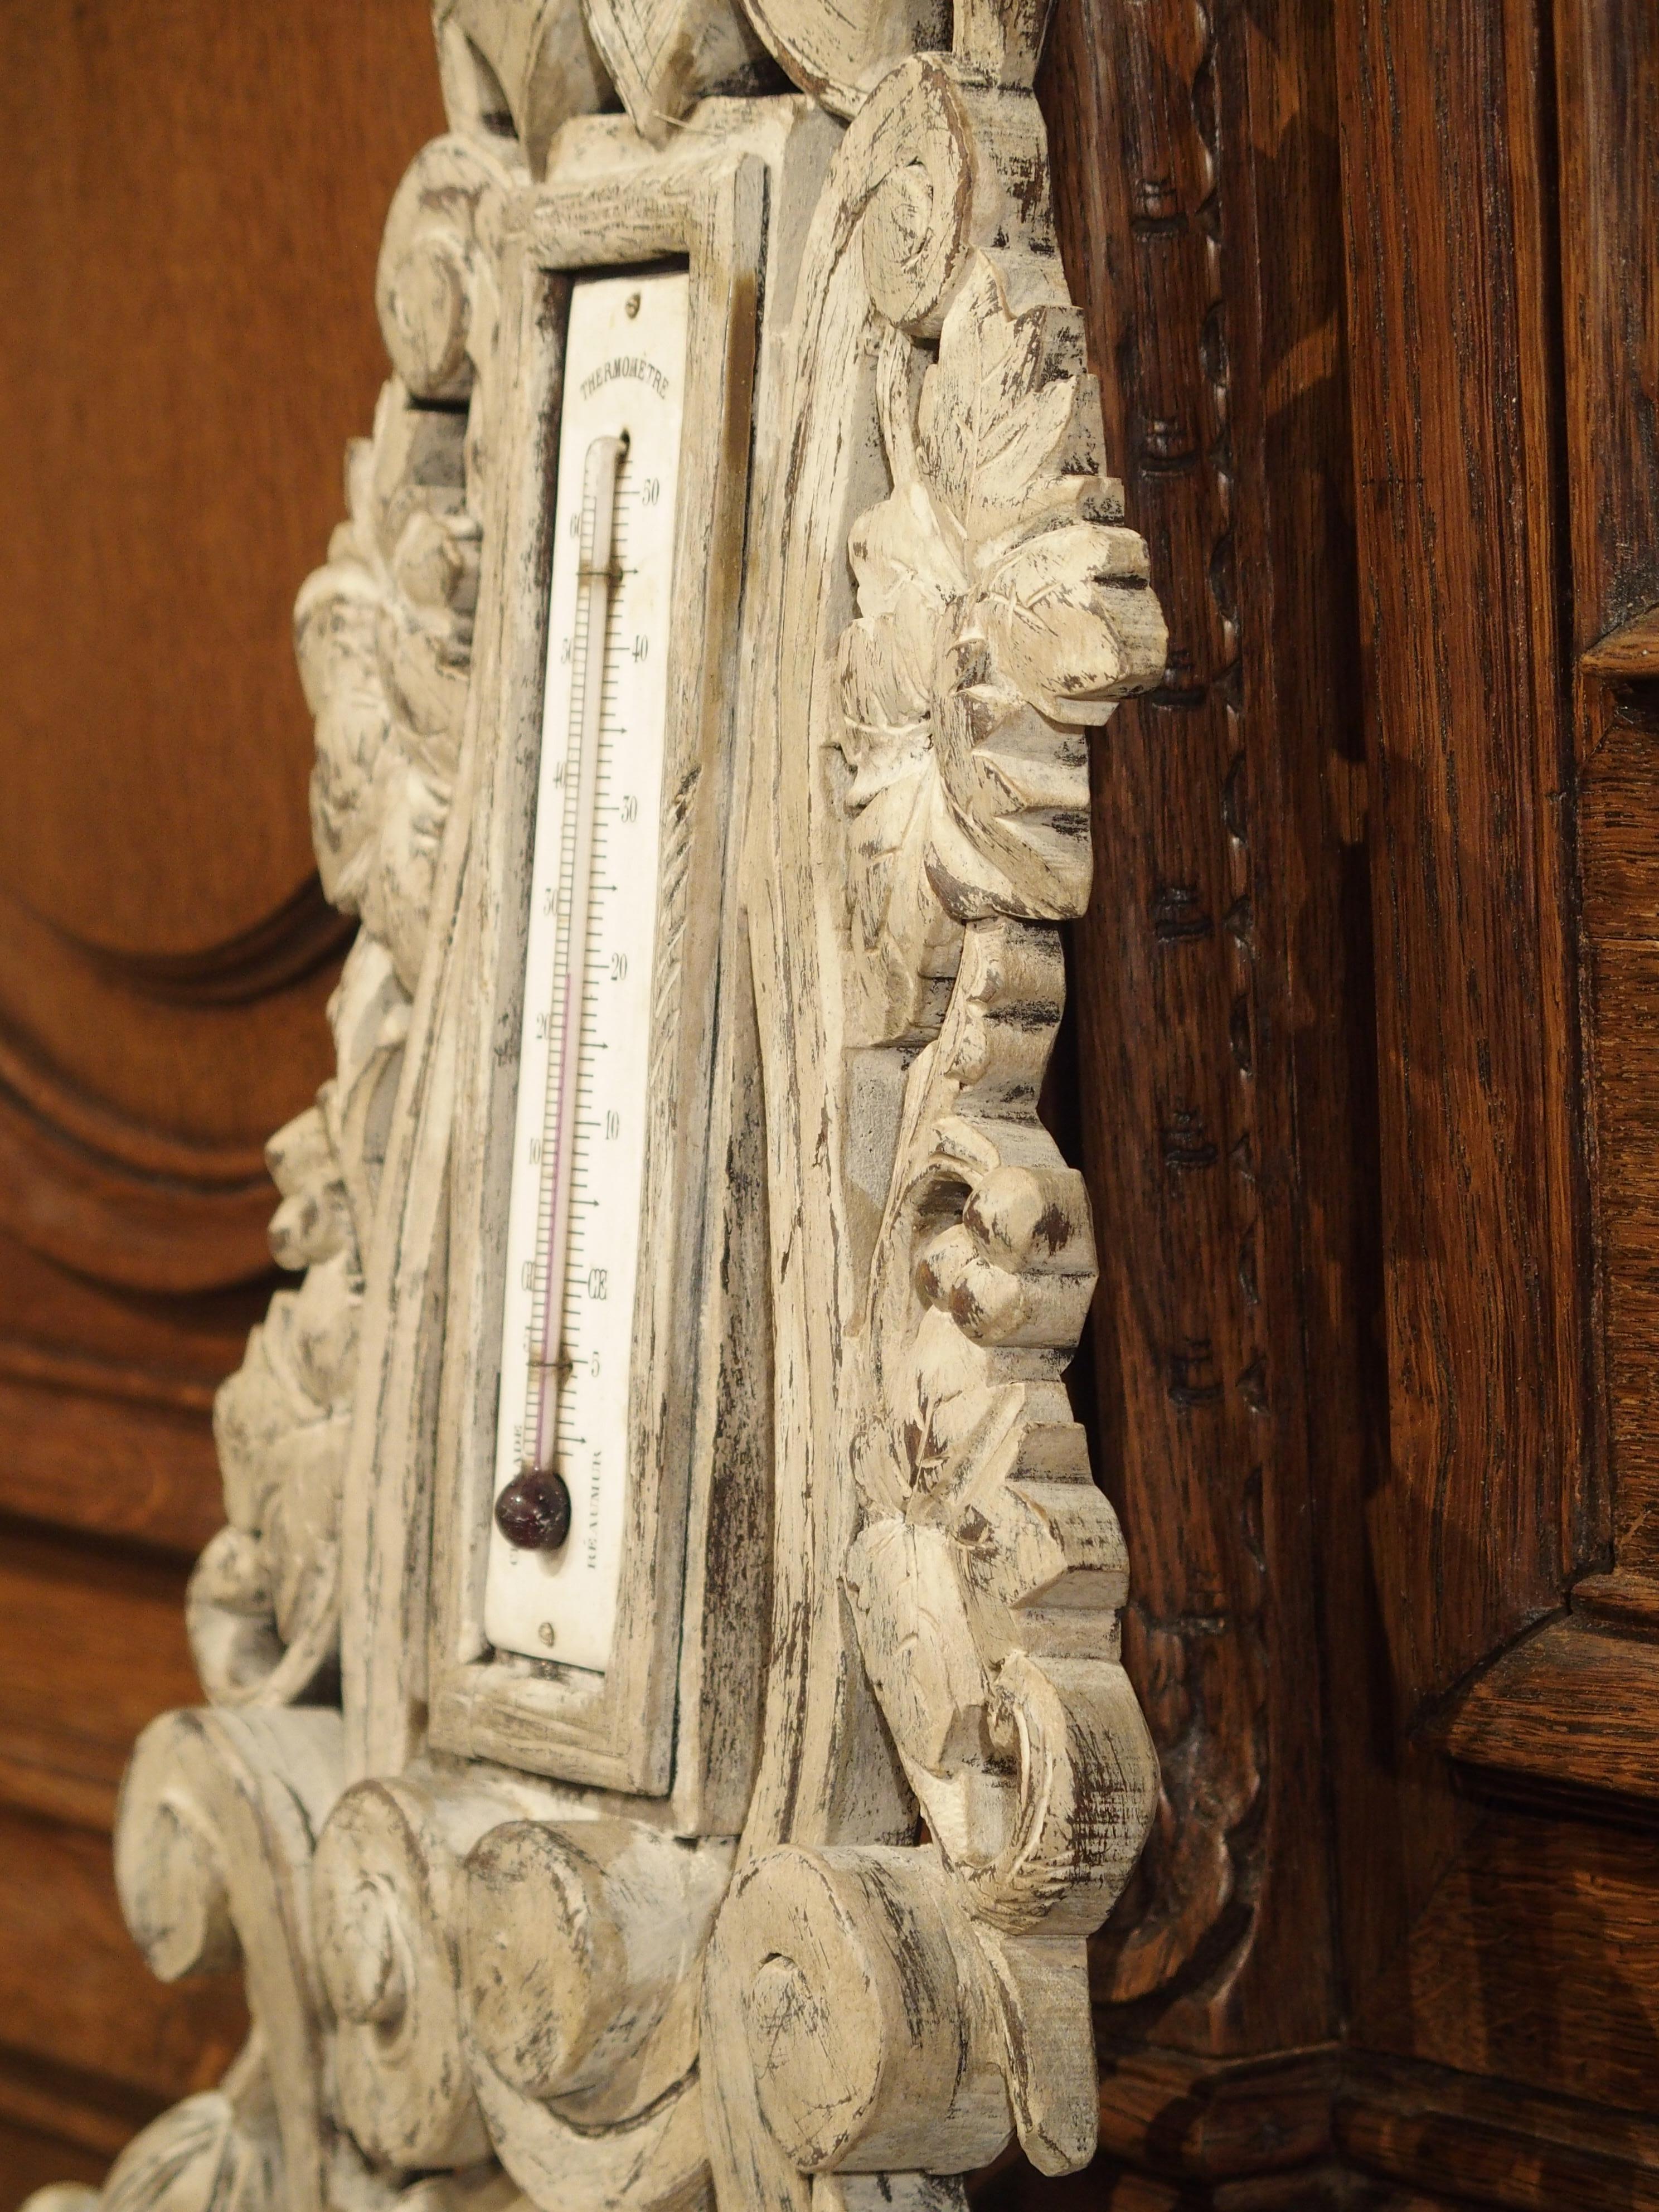 This elegant painted barometer was carved in the late 1800s. The upper portion houses a temperature gauge. The carved decorations include floral and foliate motifs, finials, and a cartouche at the top. The distressed painted finish that was given to